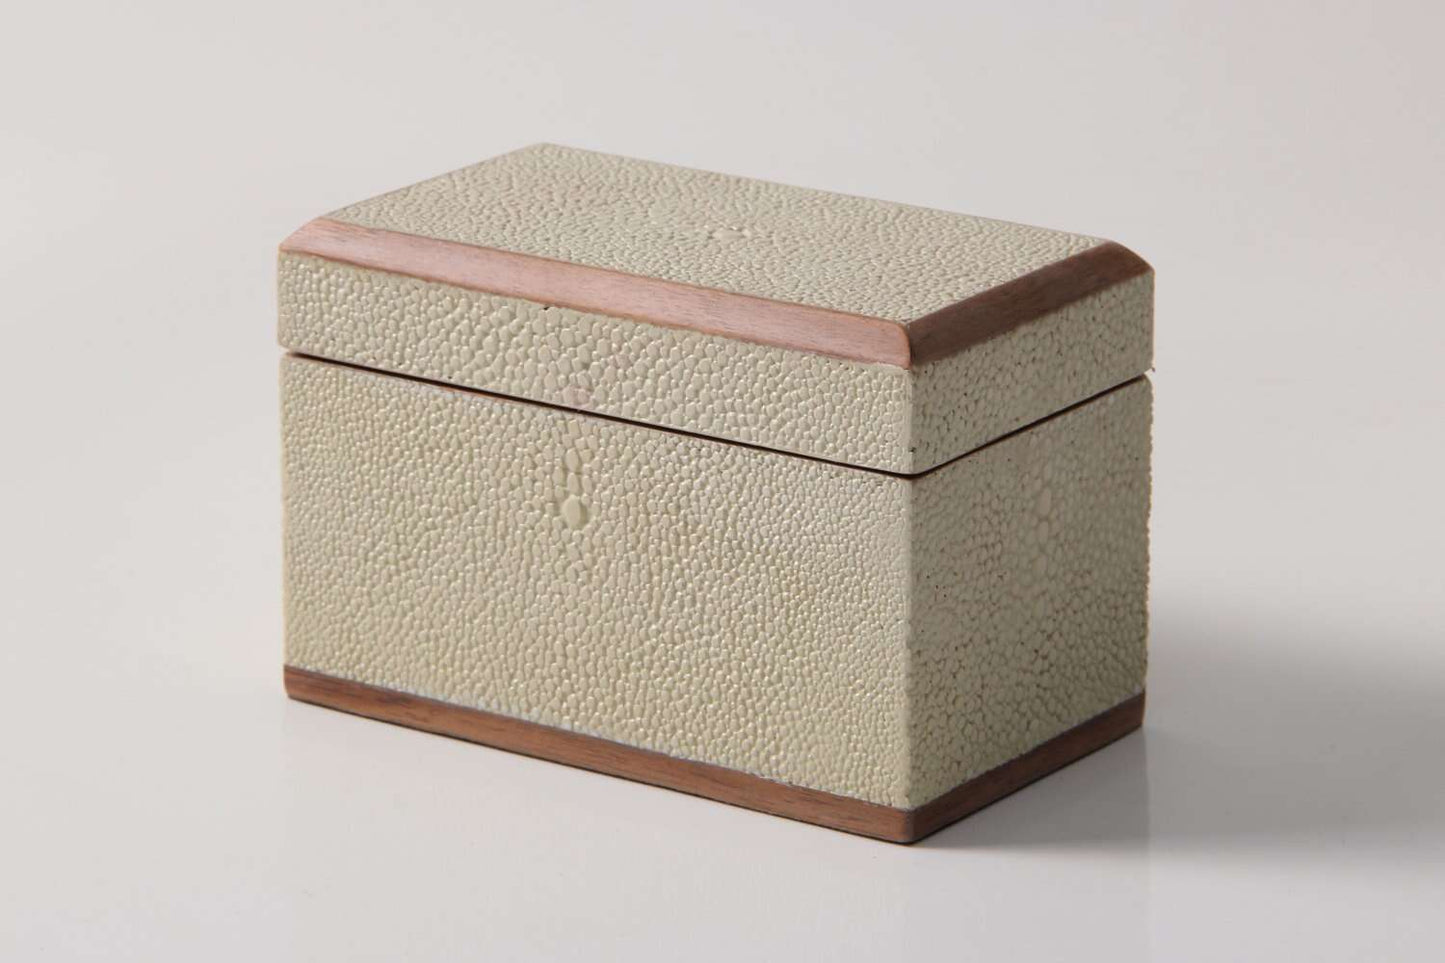 Playing Card Box in Almond White Shagreen